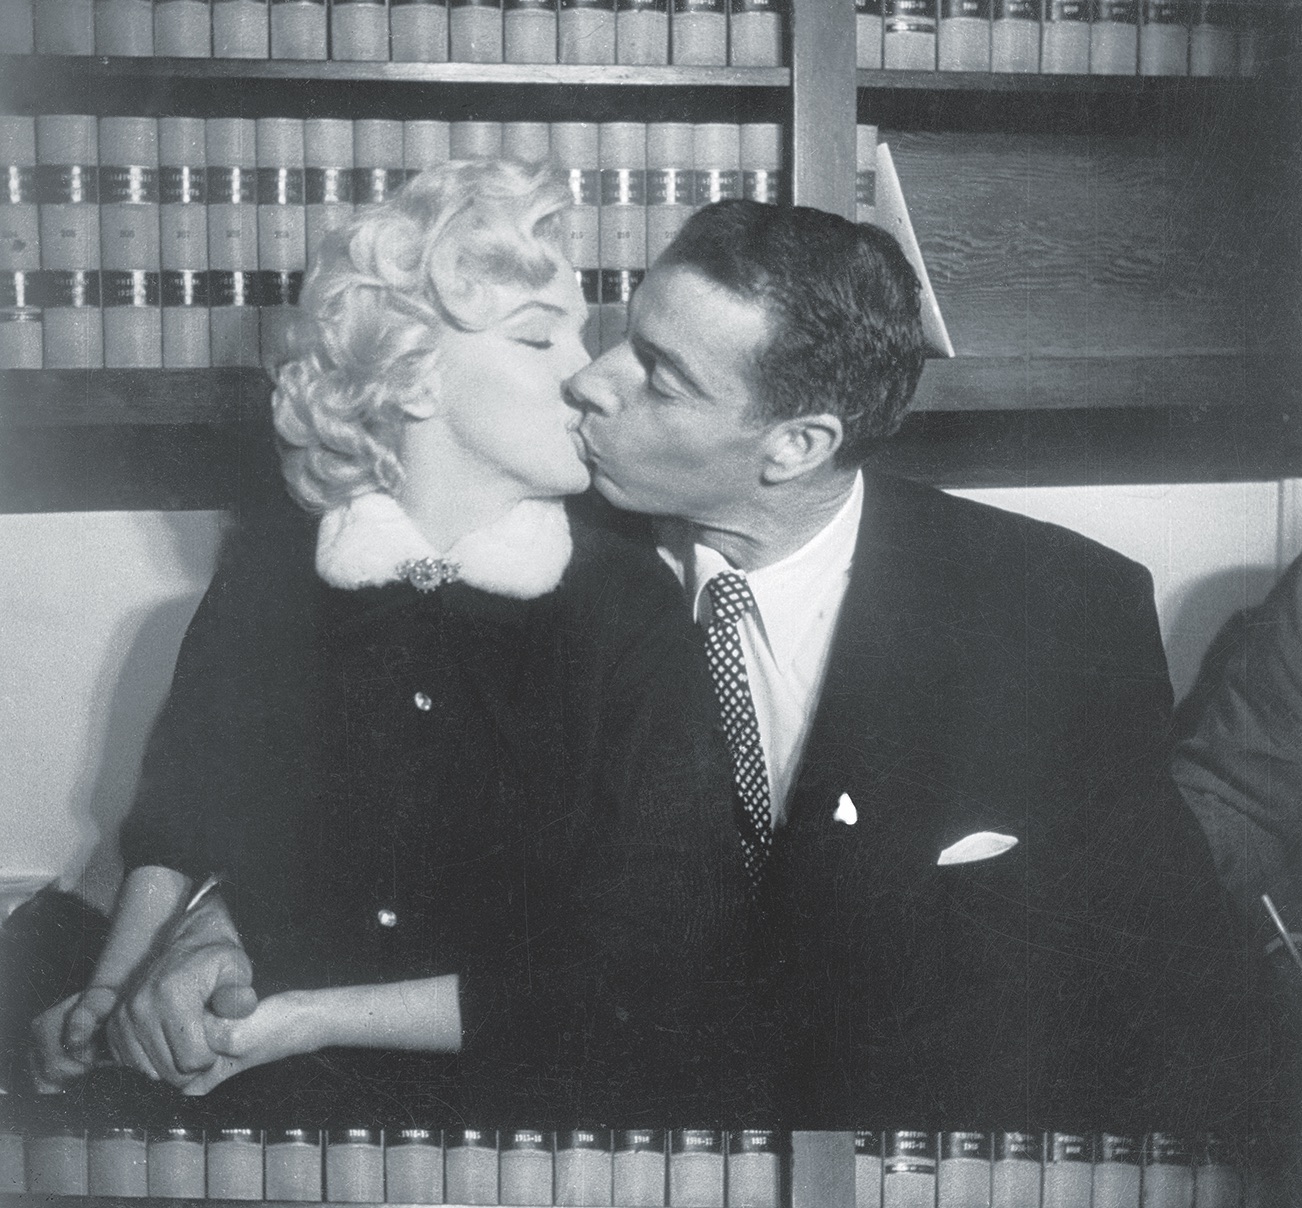 Monroe and Joe DiMaggio share a post-nuptial kiss in the judge’s chambers at San Francisco City Hall. (Bettmann/Getty Images)